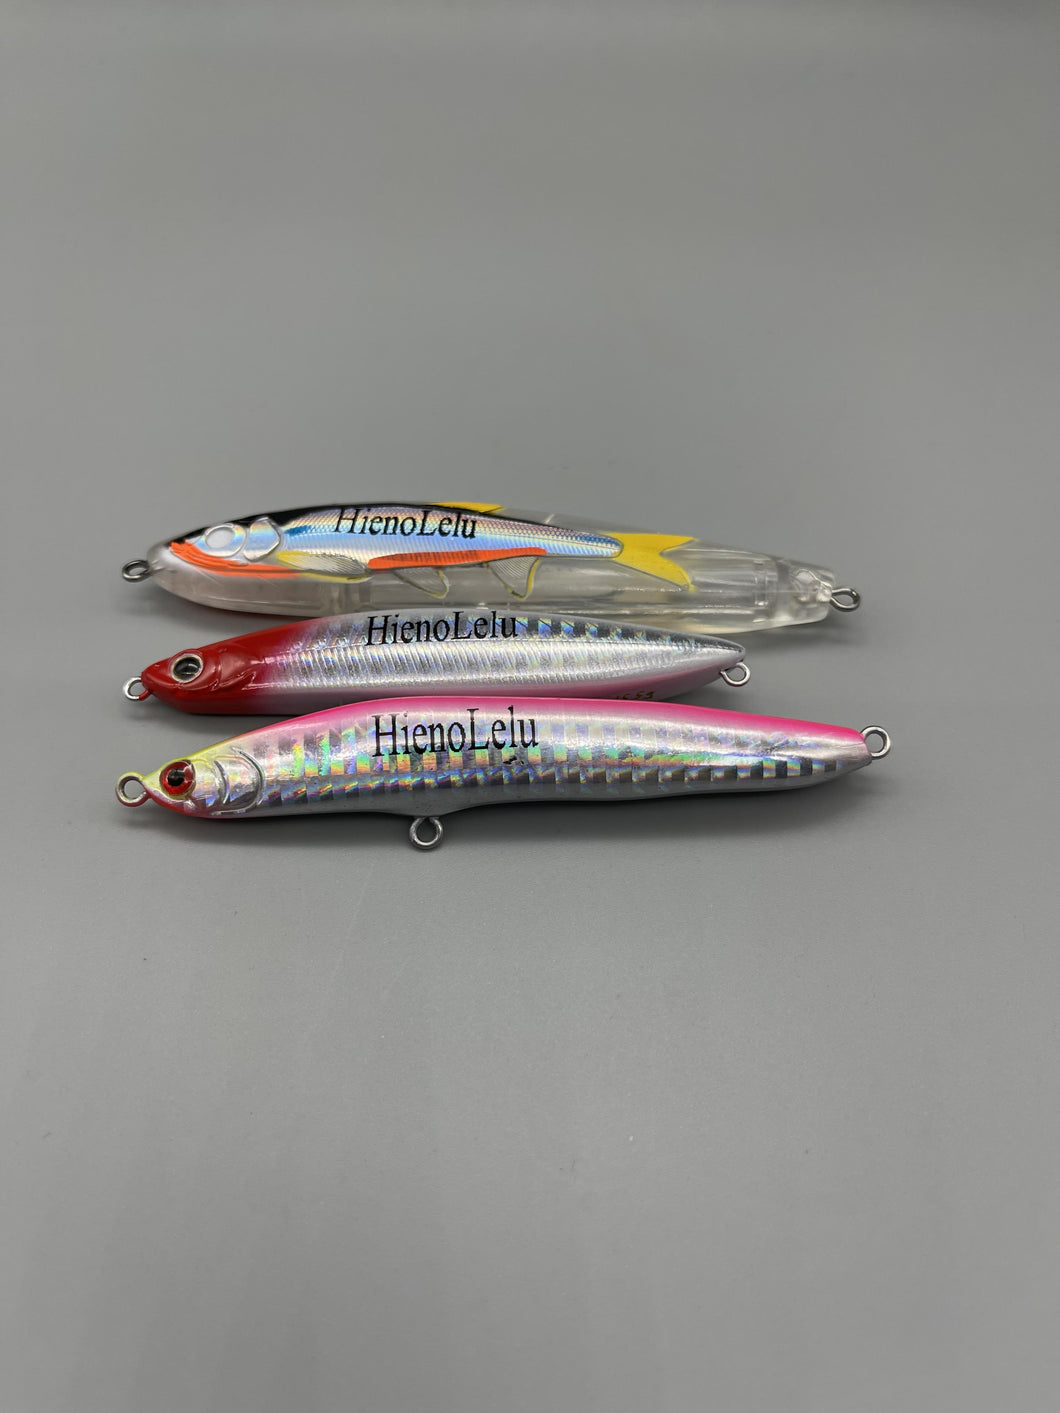 HienoLelu Fishing tackle,Multiple Simulated Fishing Soft Bait Swimbaits Slow Sinking Swimming Lures Freshwater and Saltwater，Stable and Tempting,Bass Fishing Lures Swim Baits for Freshwater with Segmented, Bionic Swimming, Swimbaits and Lure